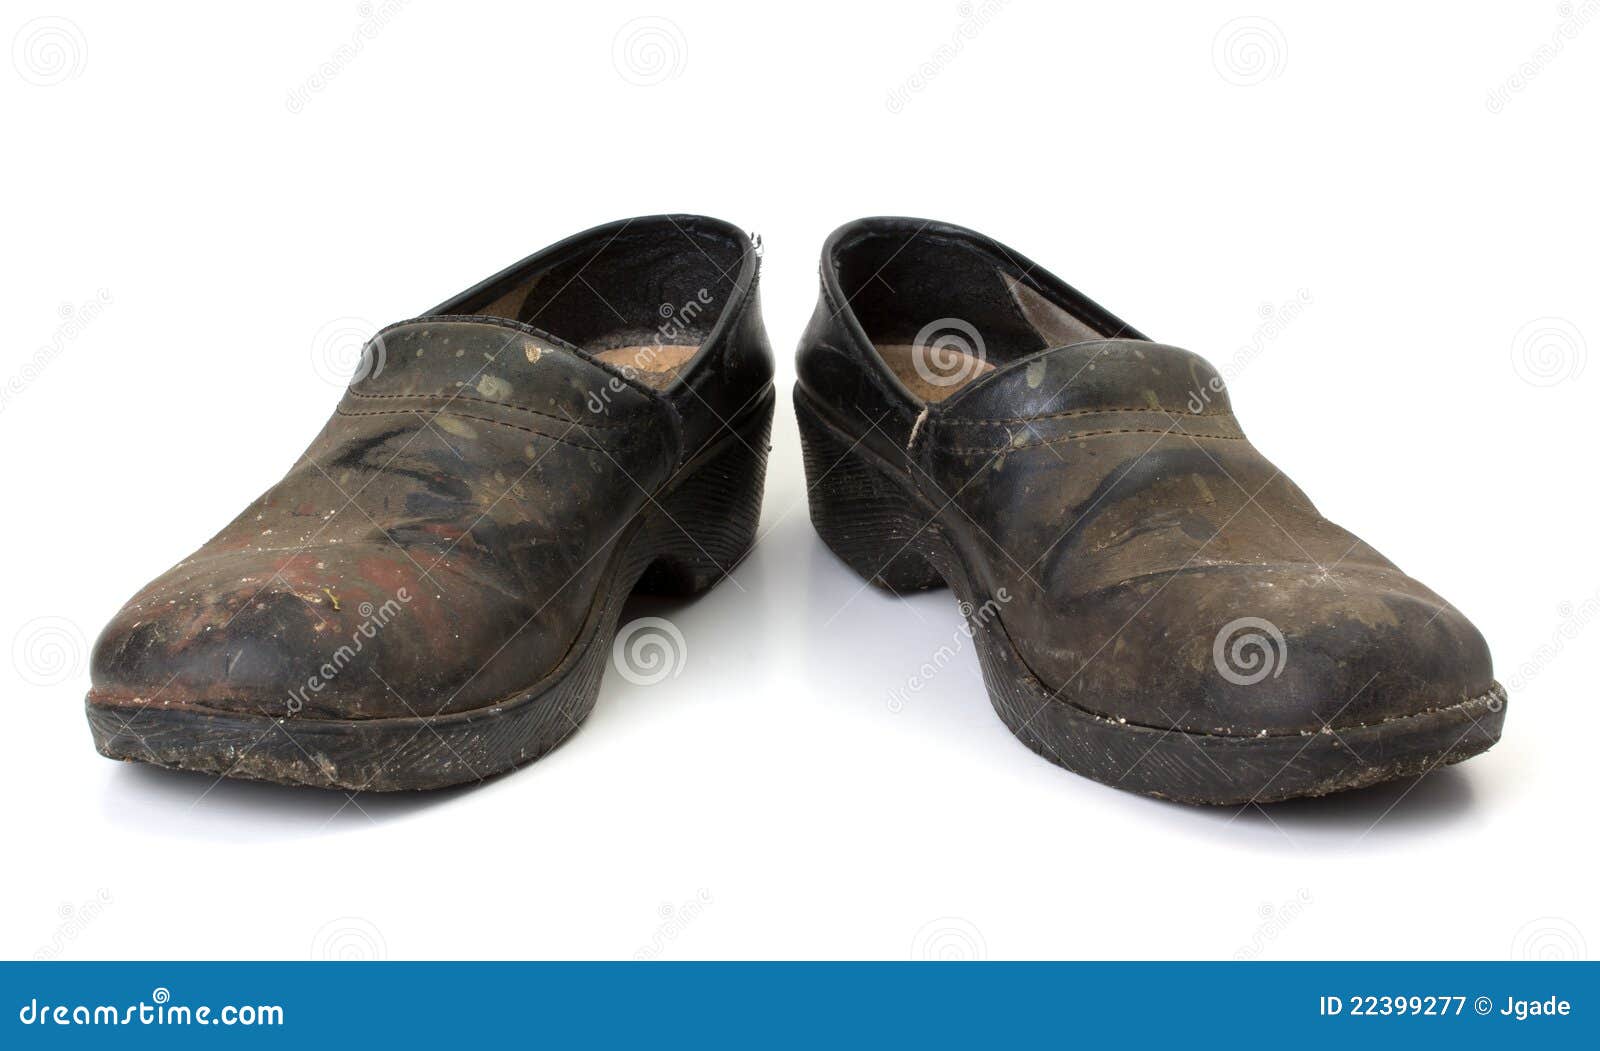 Worn out clogs stock image. Image of leather, black, shoes - 22399277